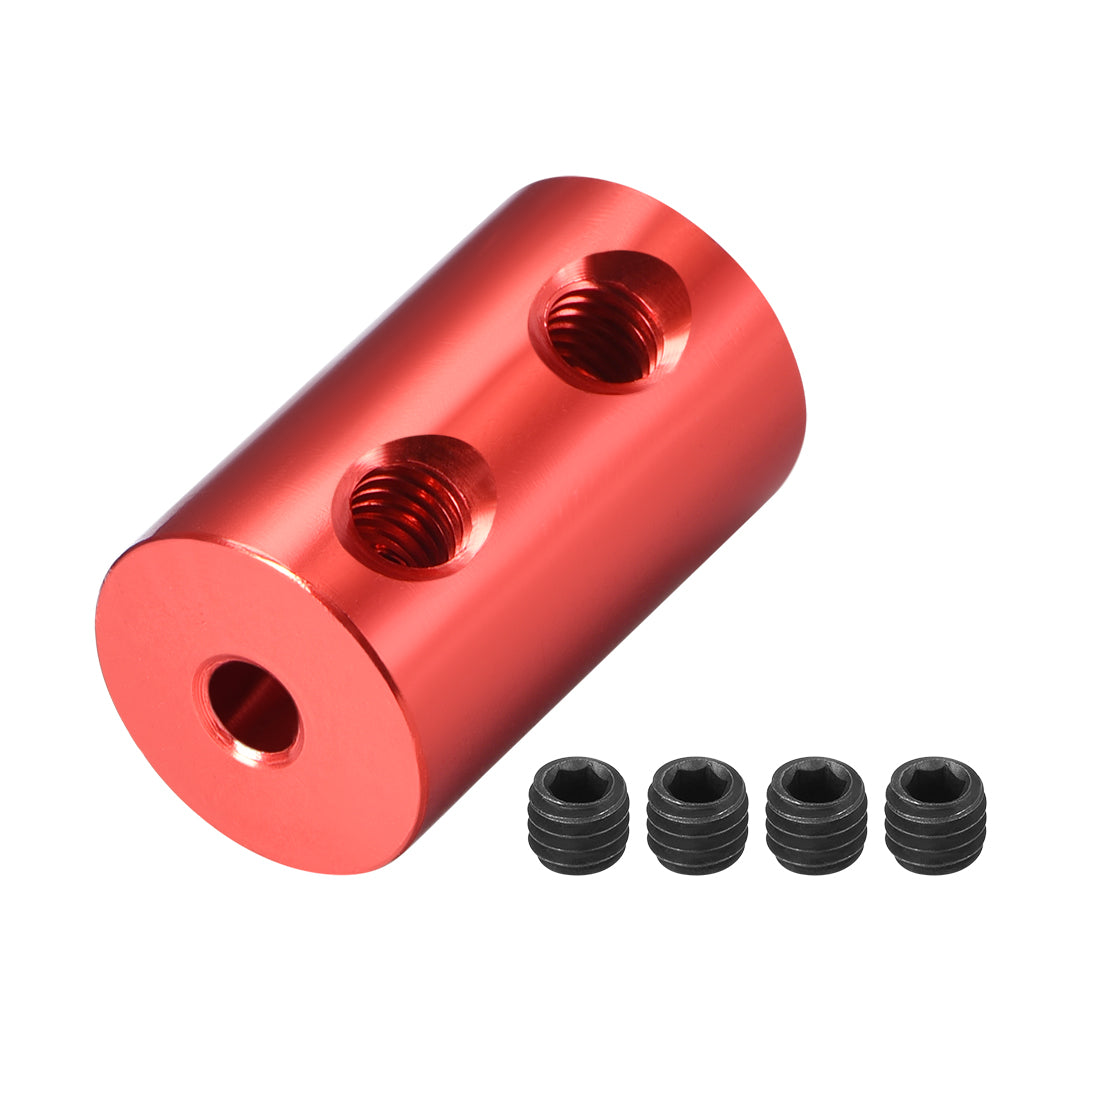 uxcell Uxcell Shaft Coupling 2mm to 3mm Bore L20xD12 Robot Motor Wheel Rigid Coupler Connector Red